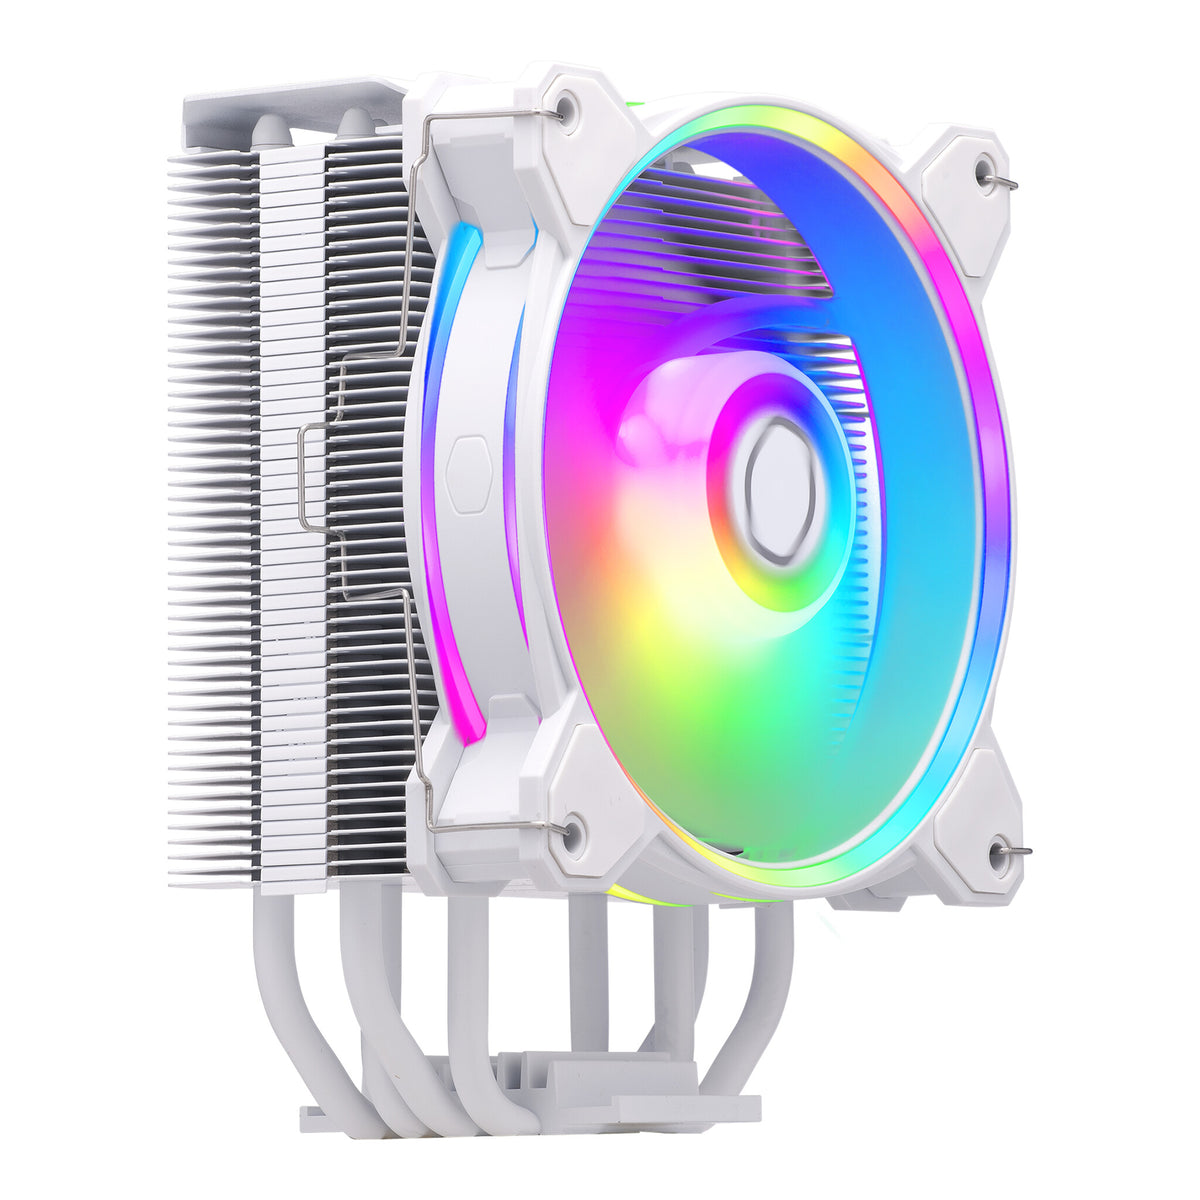 Cooler Master Hyper 212 Halo - Air Processor Cooler in White - 120mm